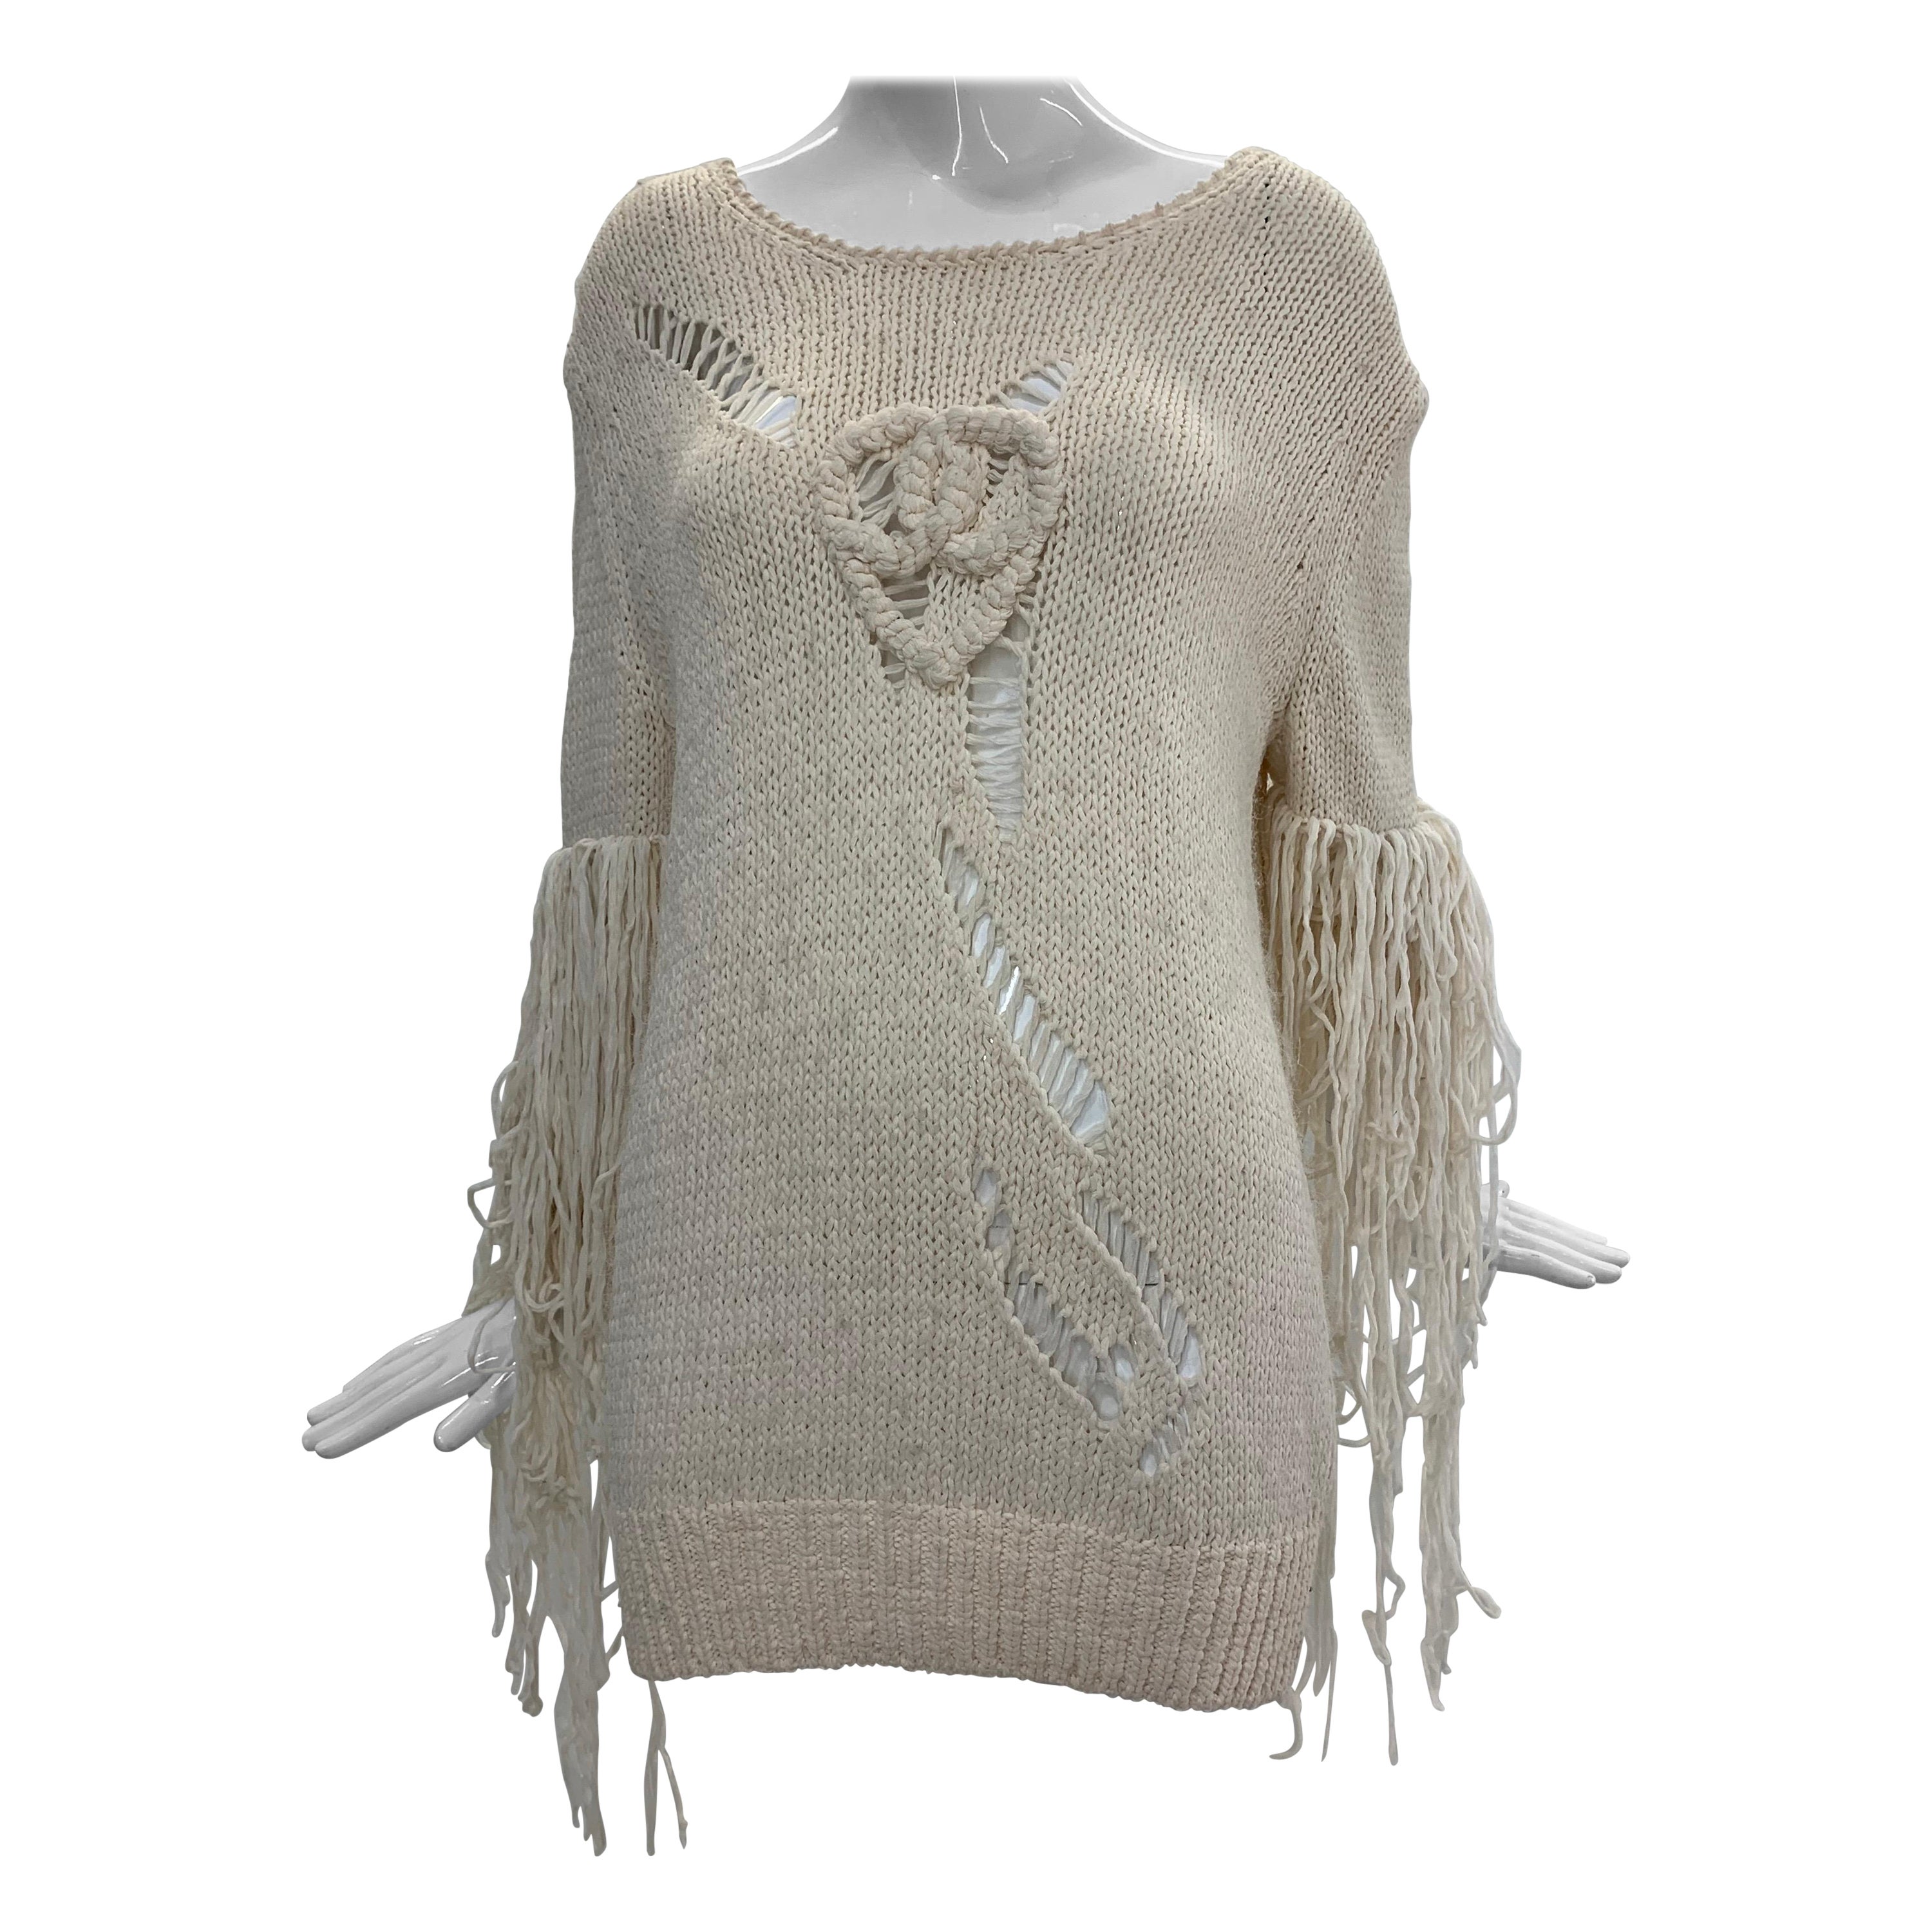 2009 Chanel Cruise Collection Cream Silk Knit Pullover Sweater w/ "CC" Logo For Sale